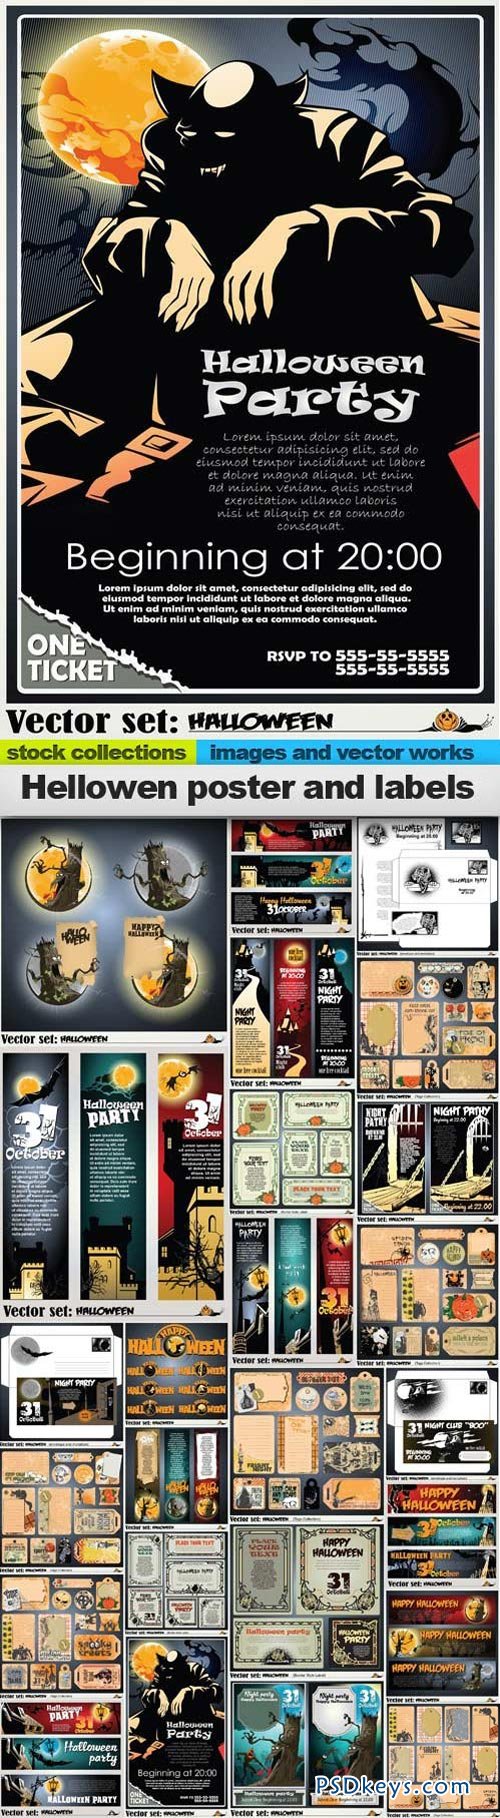 Hellowen poster and labels 25xEPS